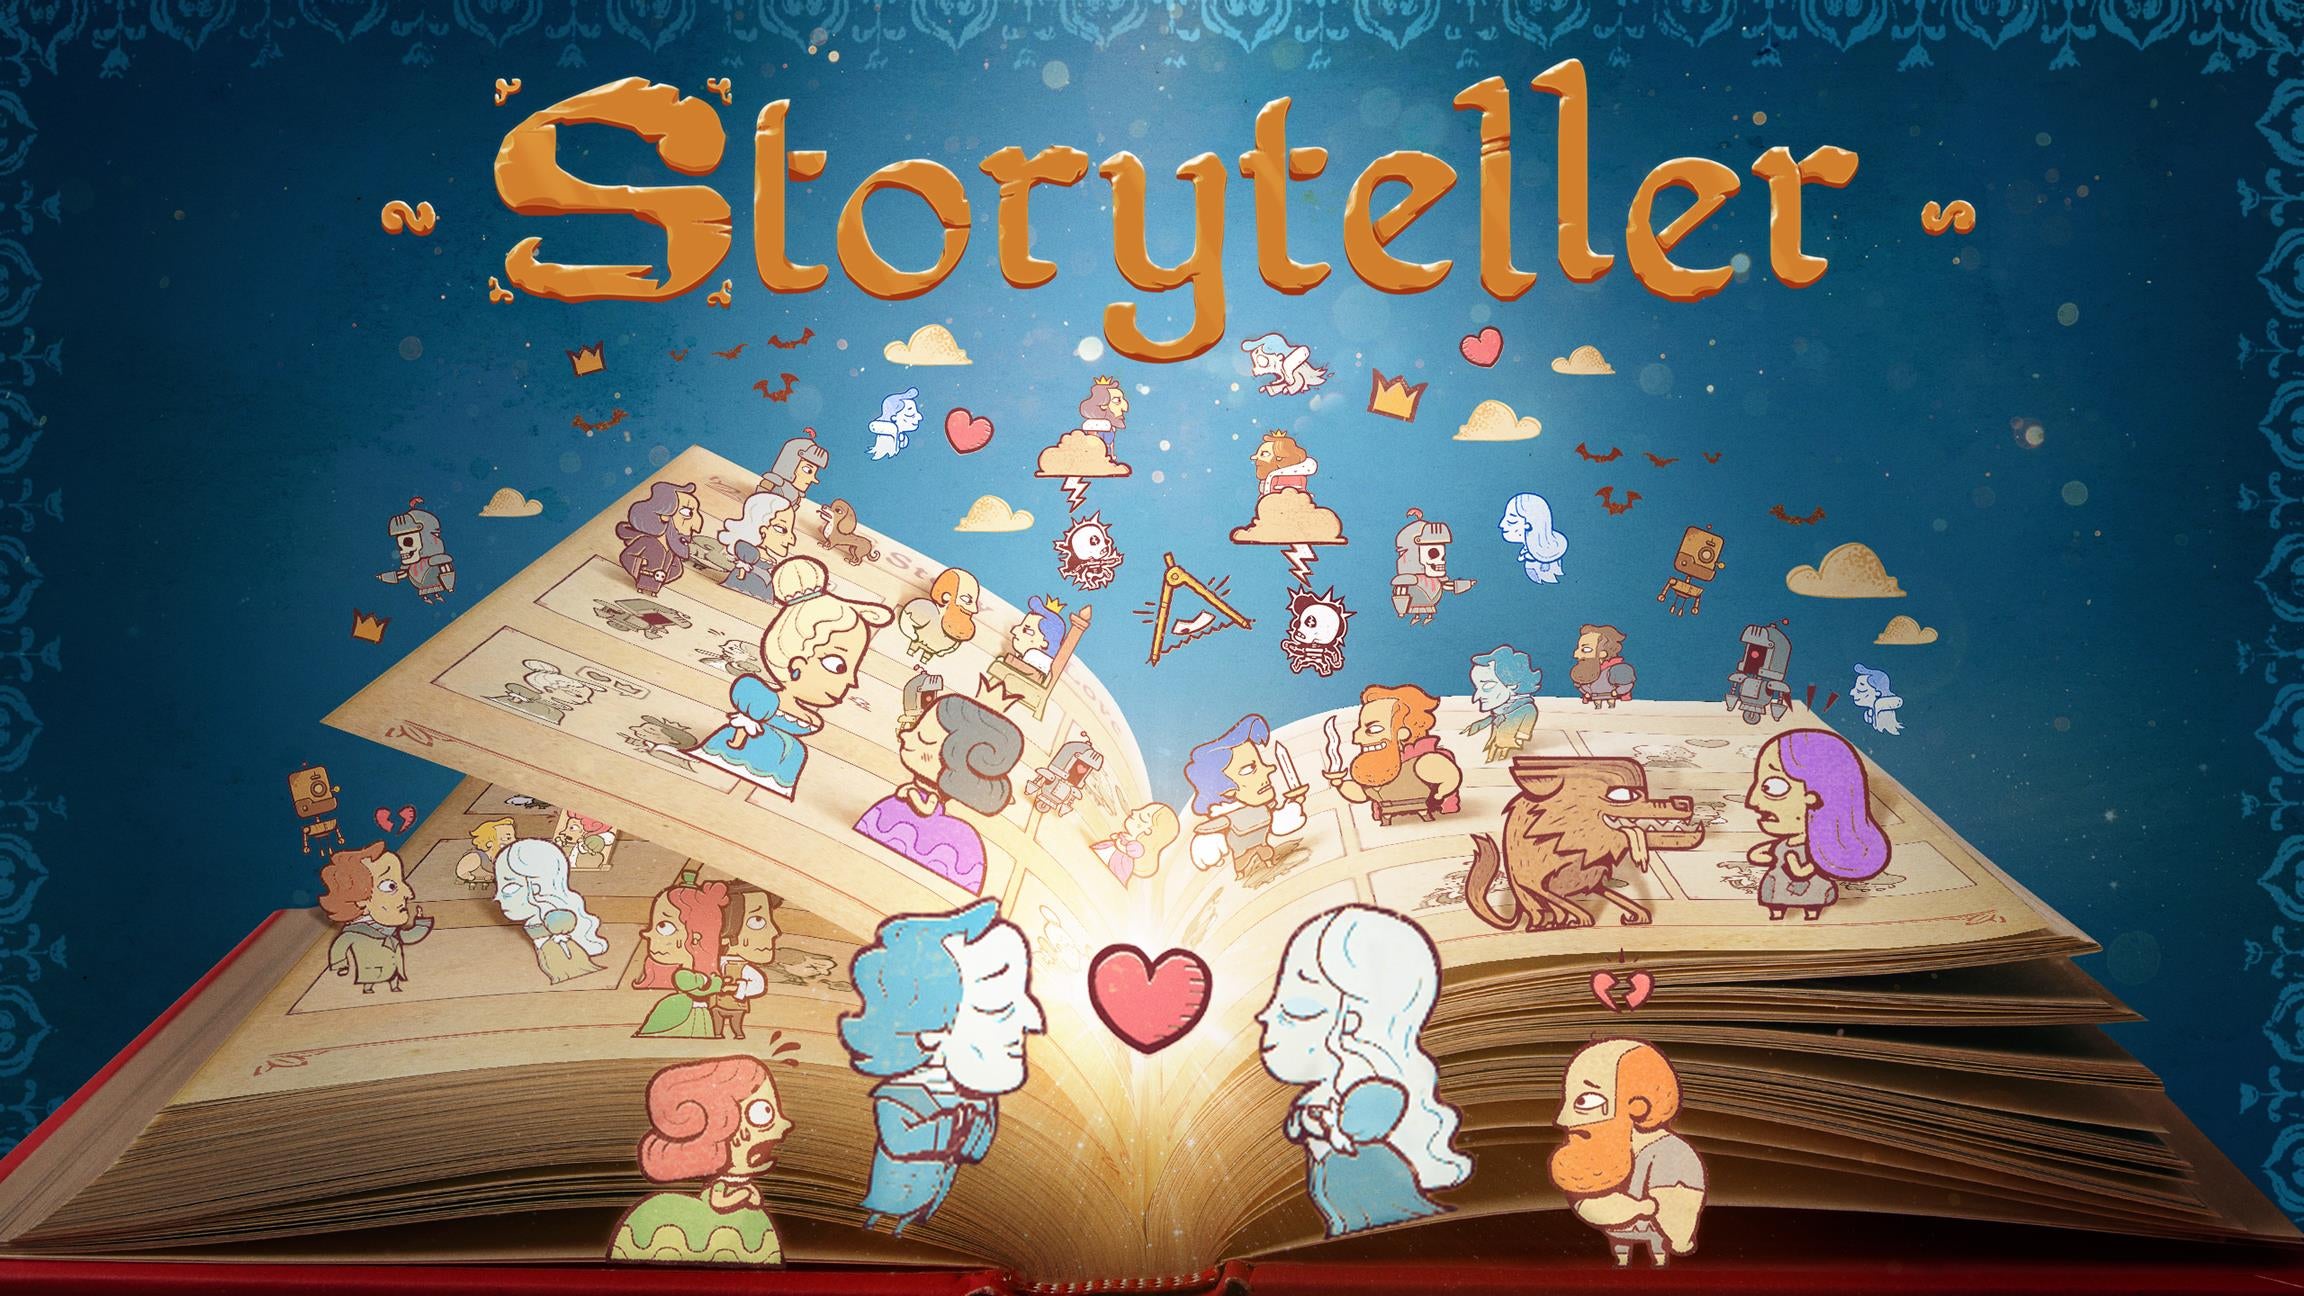 Image for Storyteller is a clever game about the crafting of stories